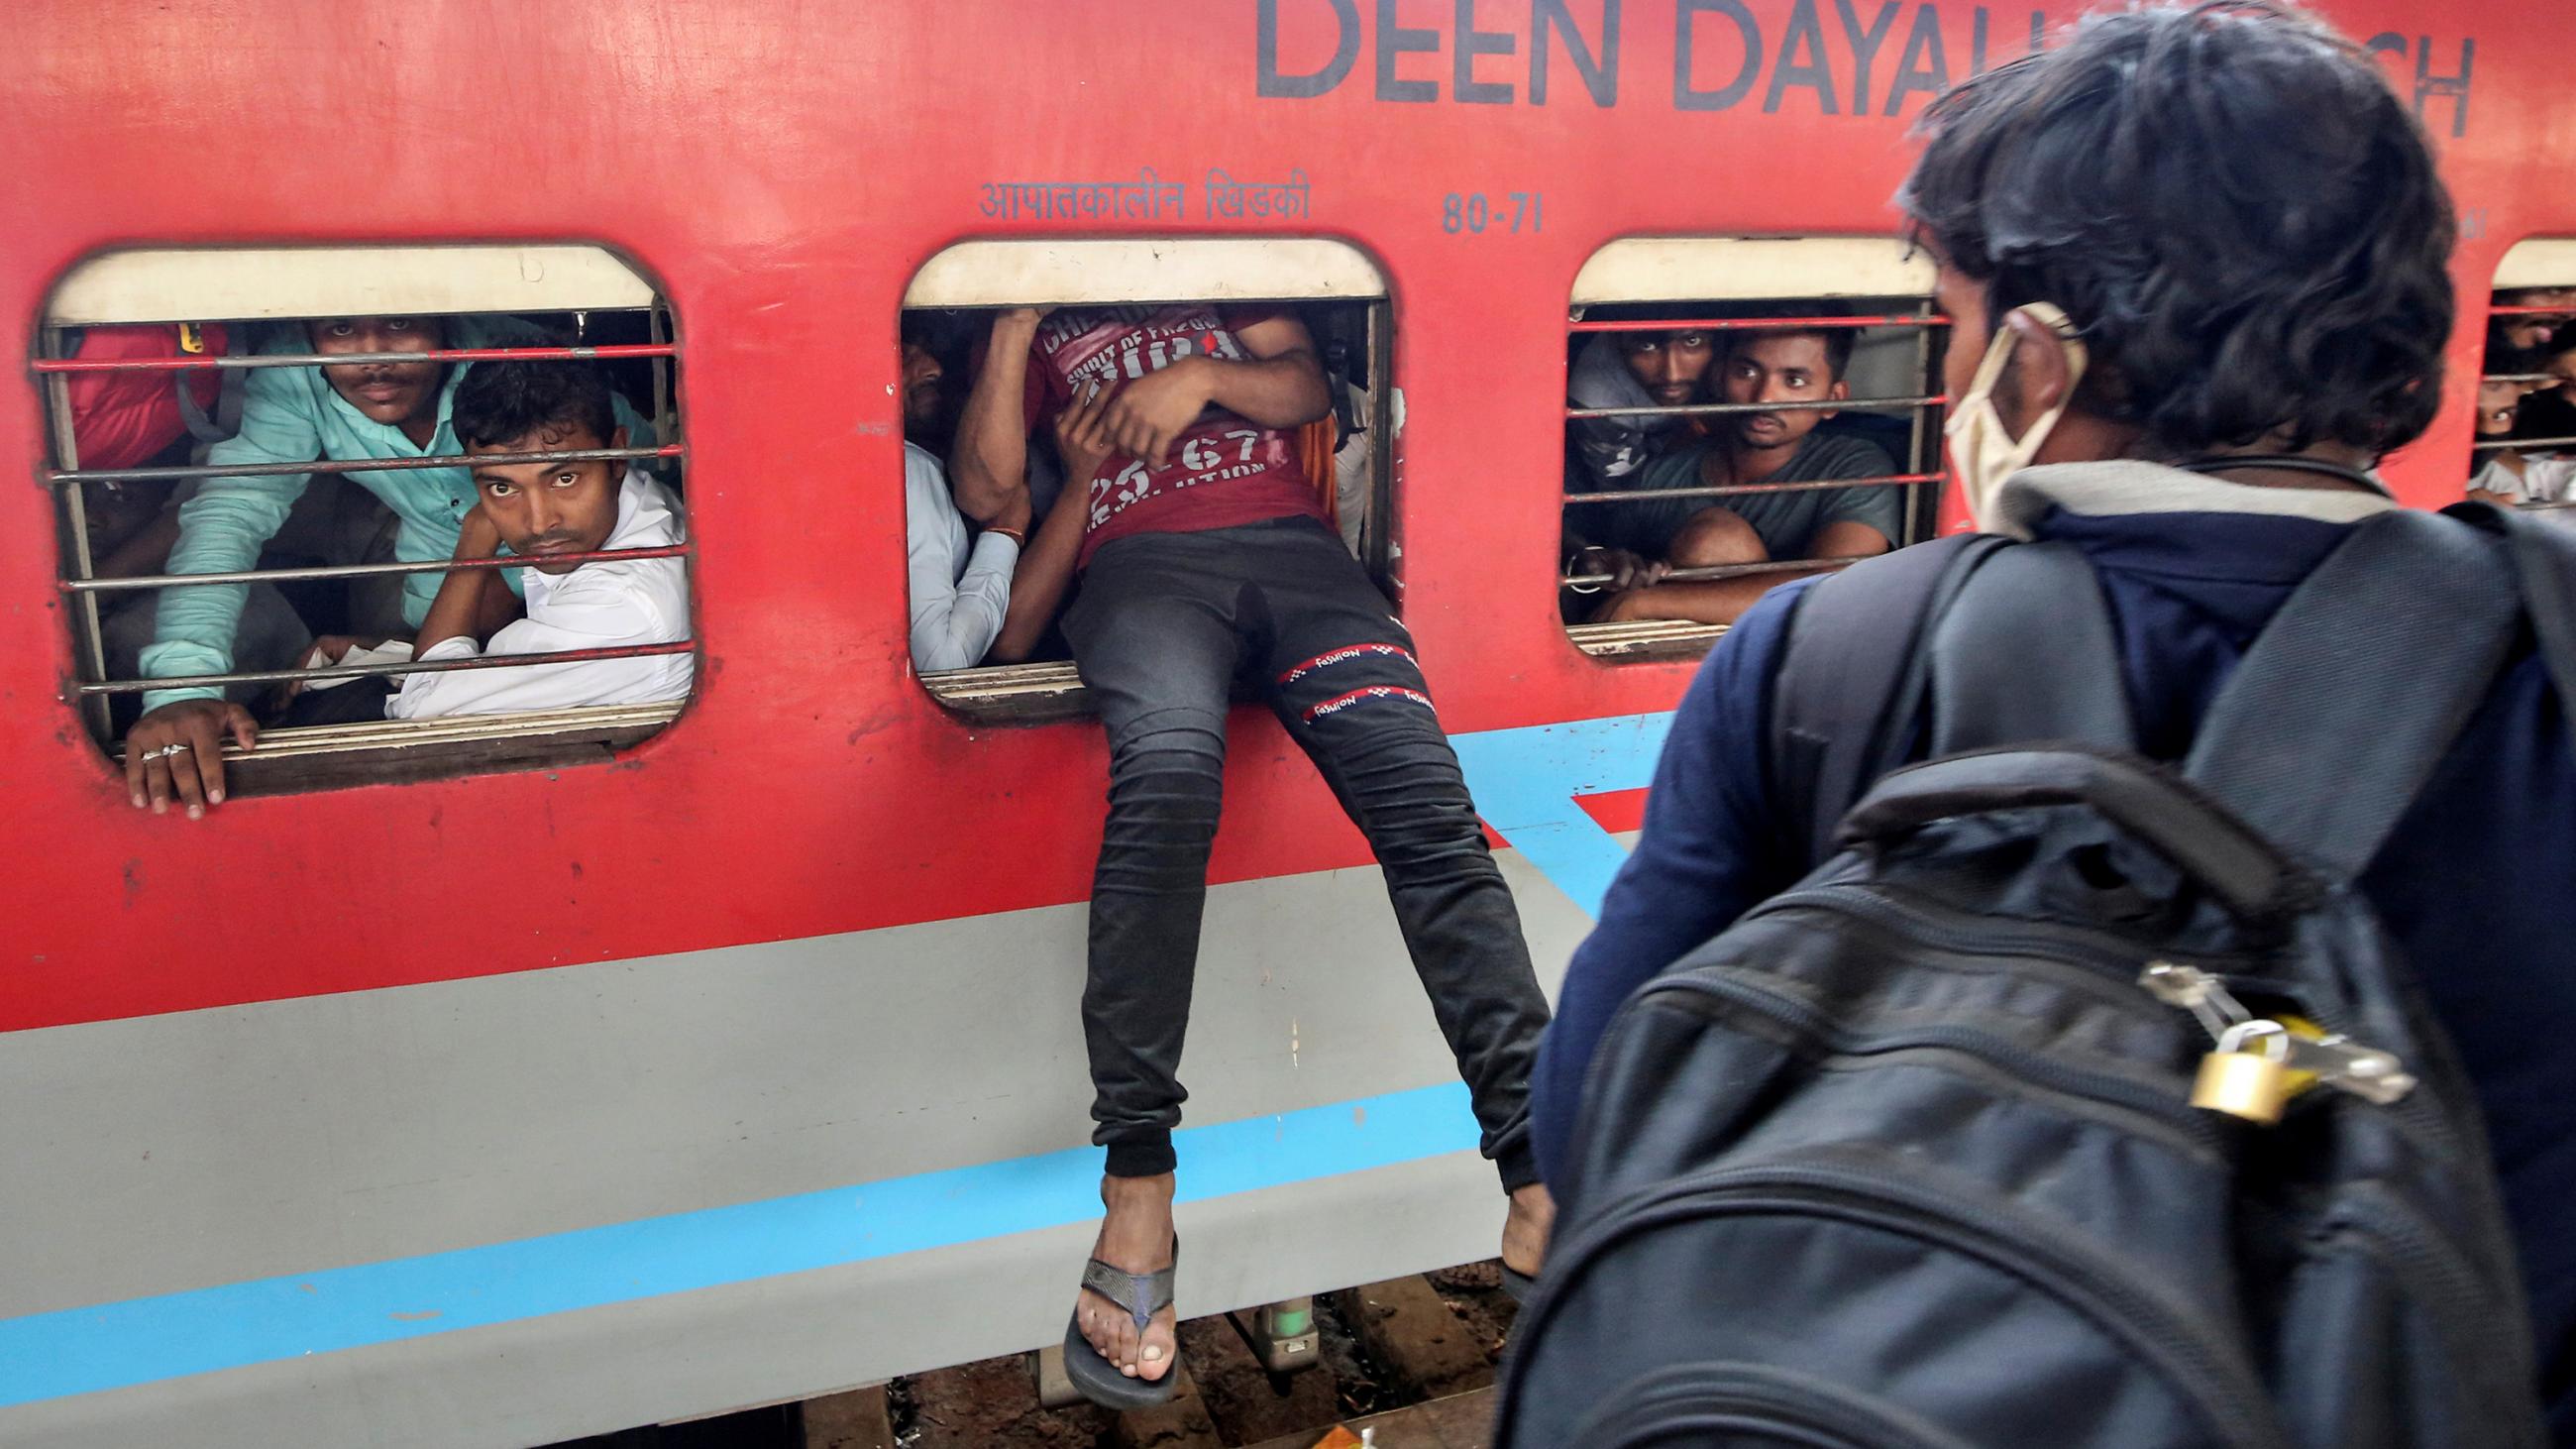 This is a striking photo of someone trying to scramble through the open window of a bright red passenger car on a train. Their legs from the waist down dangle precariously out the window. 